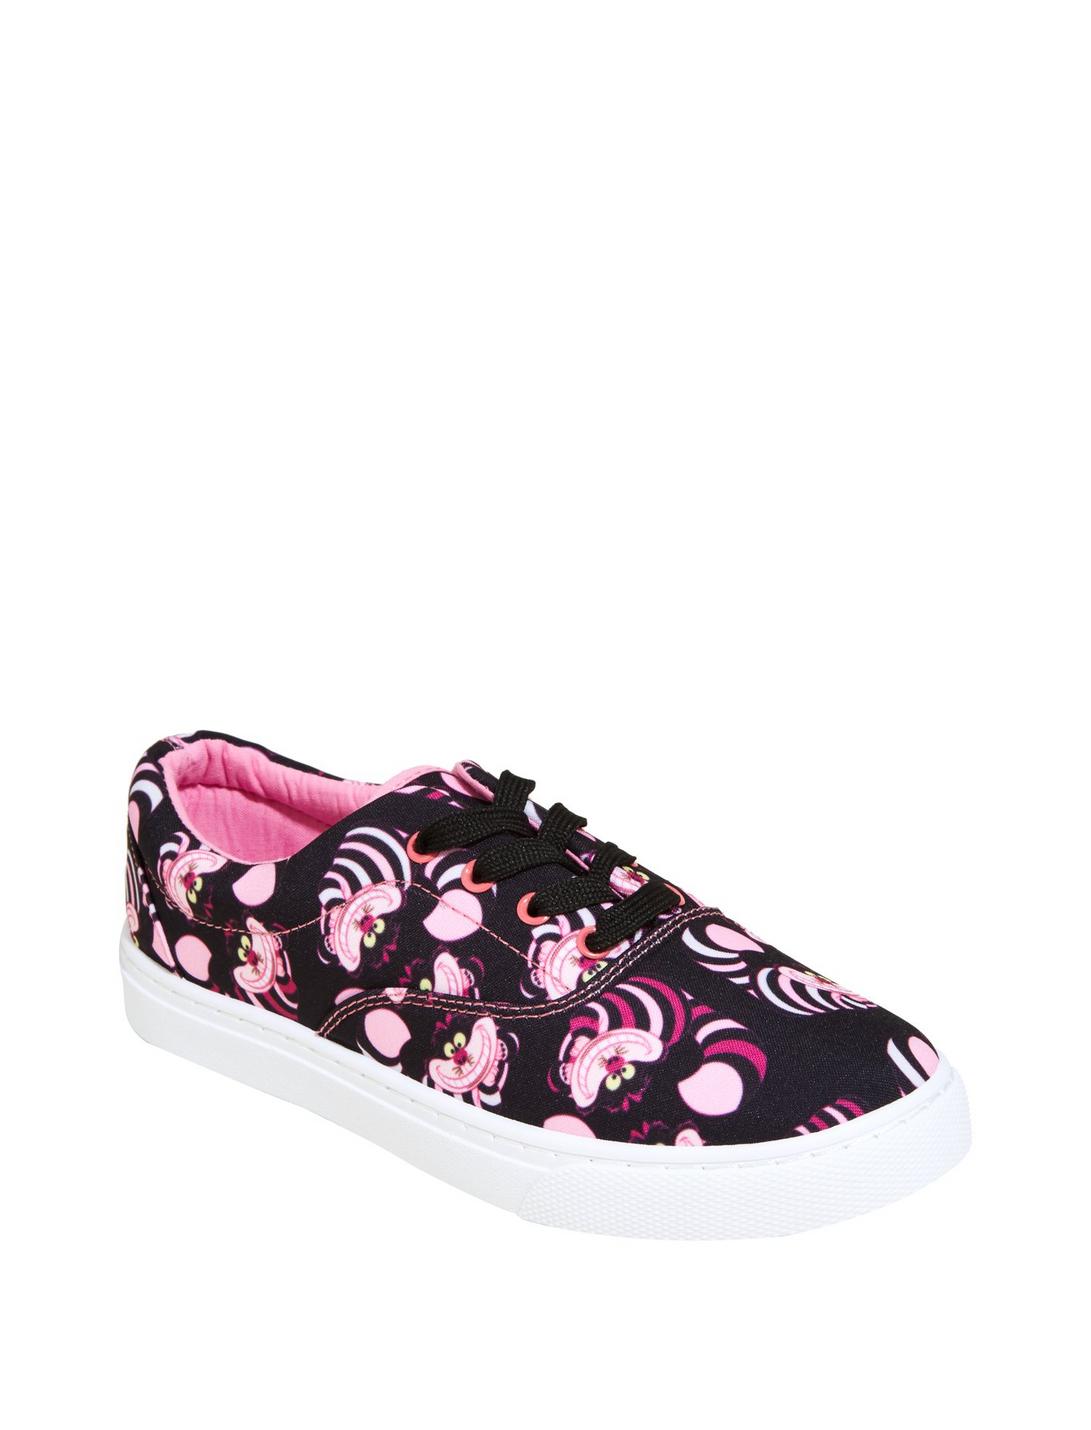 Disney Alice In Wonderland Cheshire Cat Allover Print Lace-Up Sneakers, BLACK, hi-res